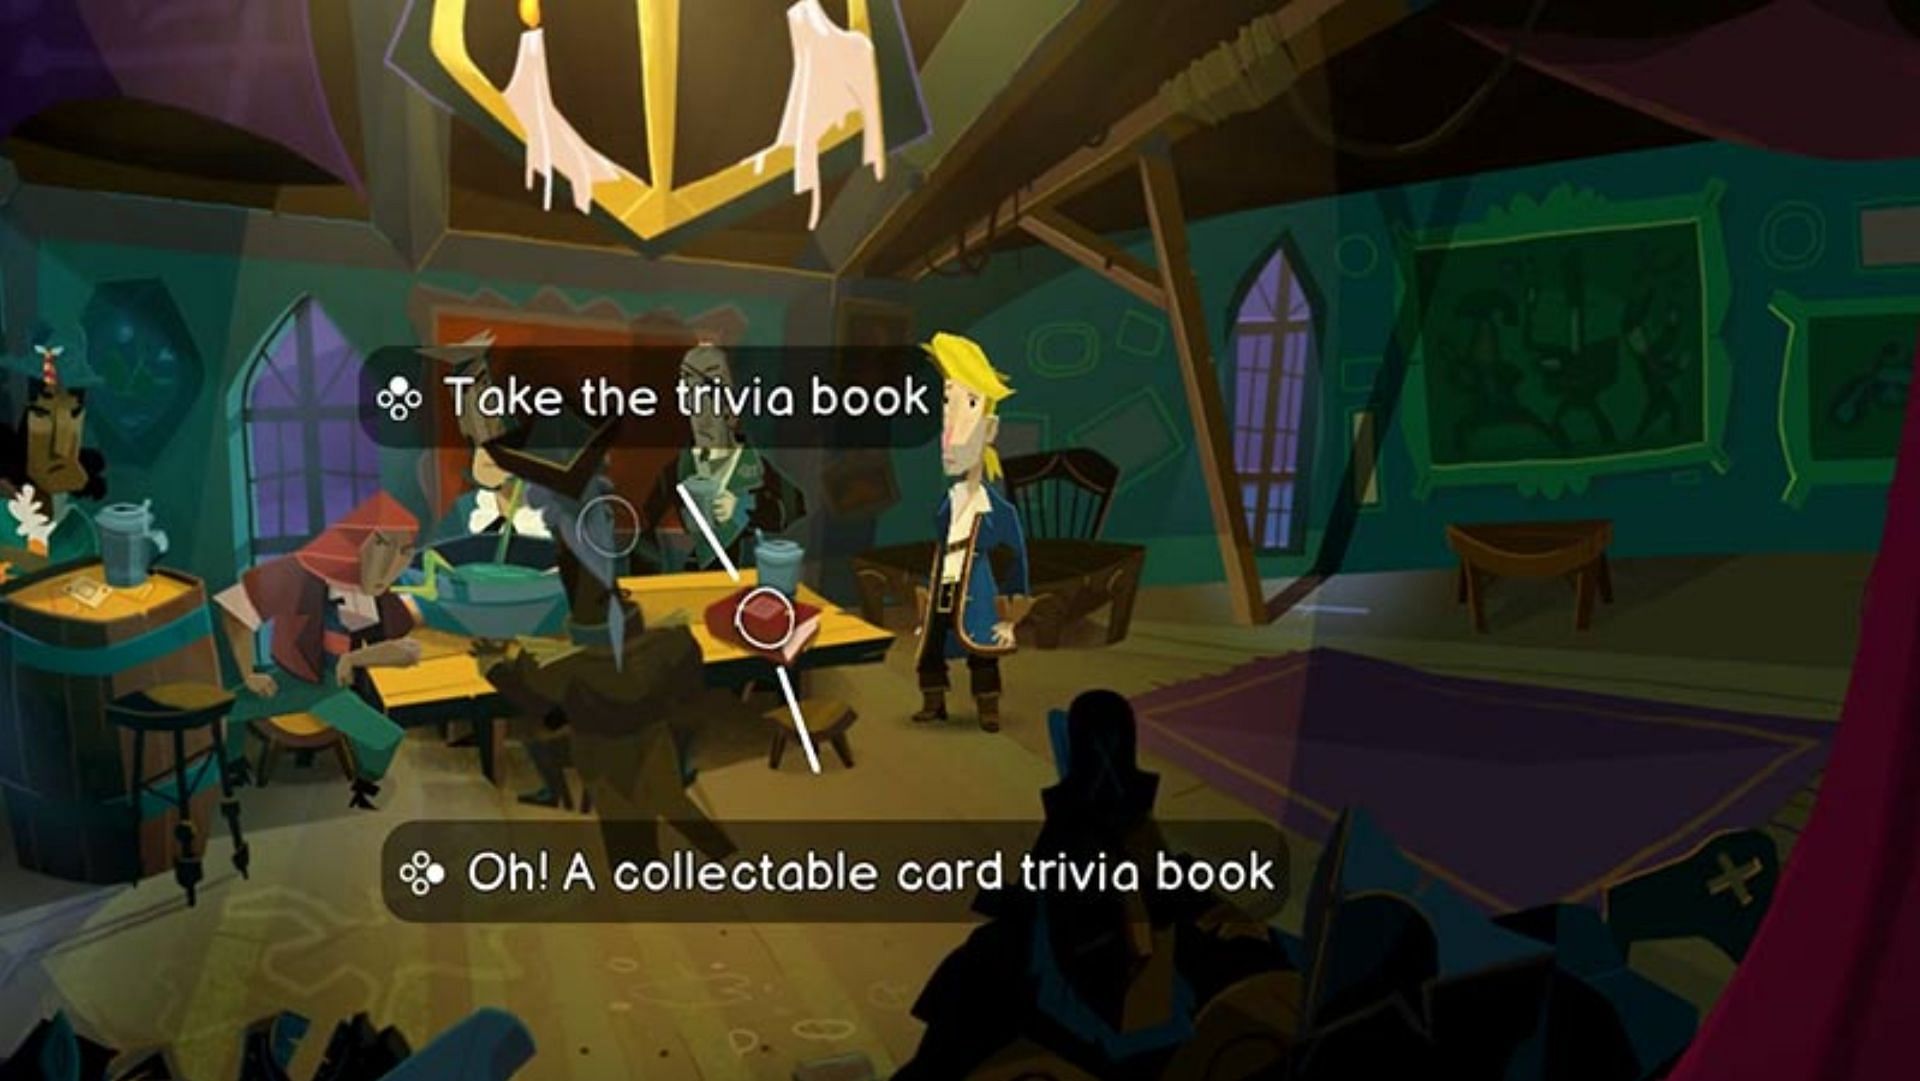 Players can go to the docks to collect Trivia Cards. (Image via Devolver Digital)